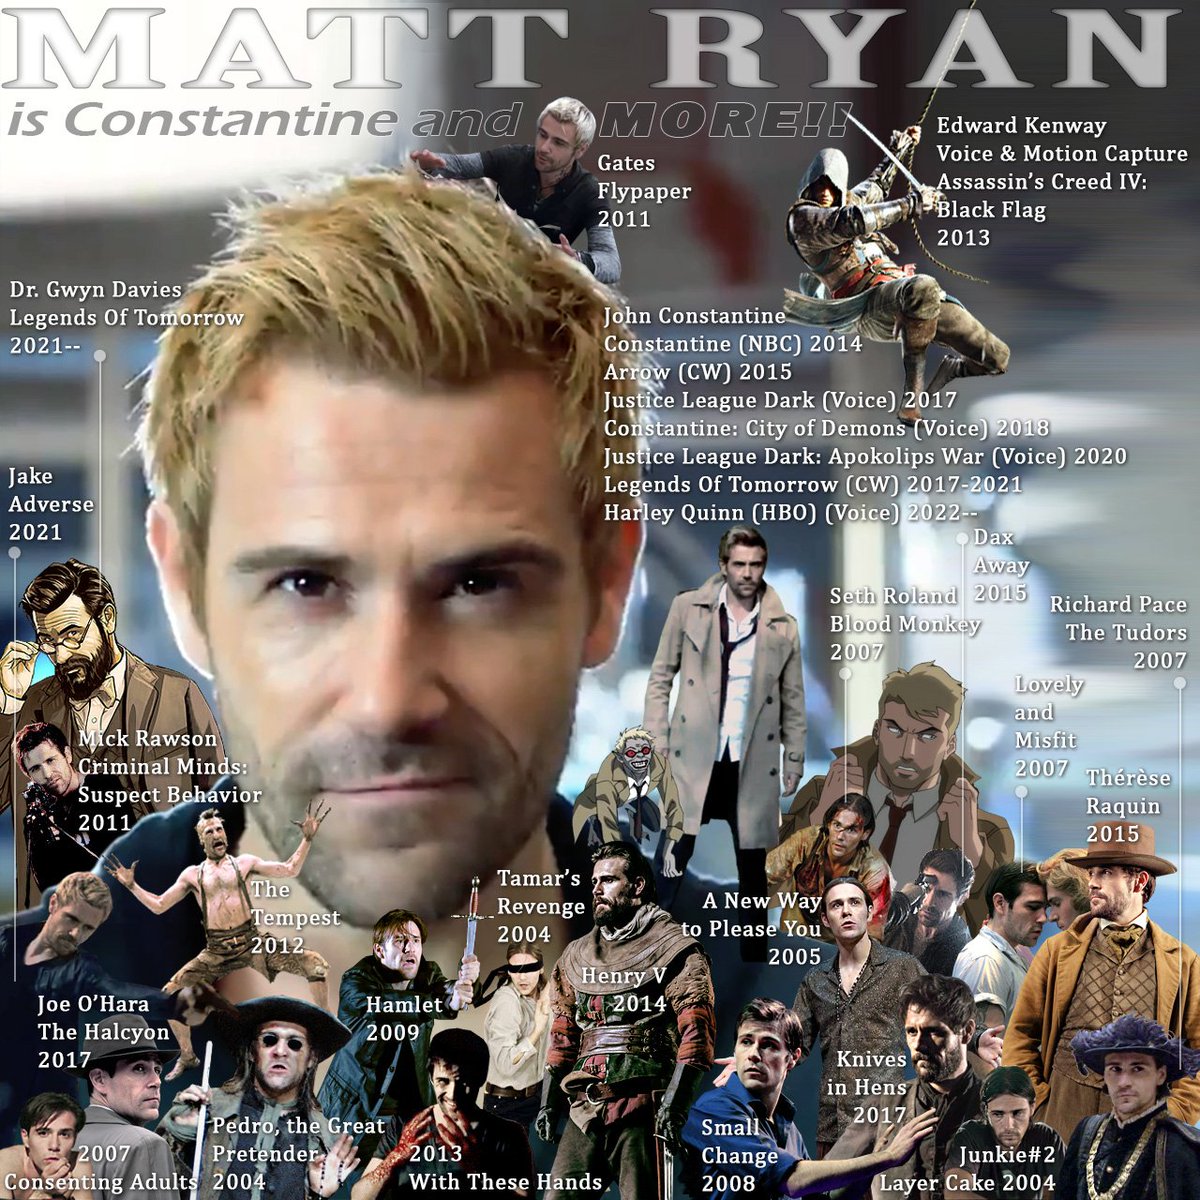 Index of @mattryanreal's characters:)
(though not all the roles are included in this pic...)
#EdwardKenway
#AssasinsCreed
#CriminalMinds
#Constantine
#JusticeLeagueDark
#LegendsOfTomorrow